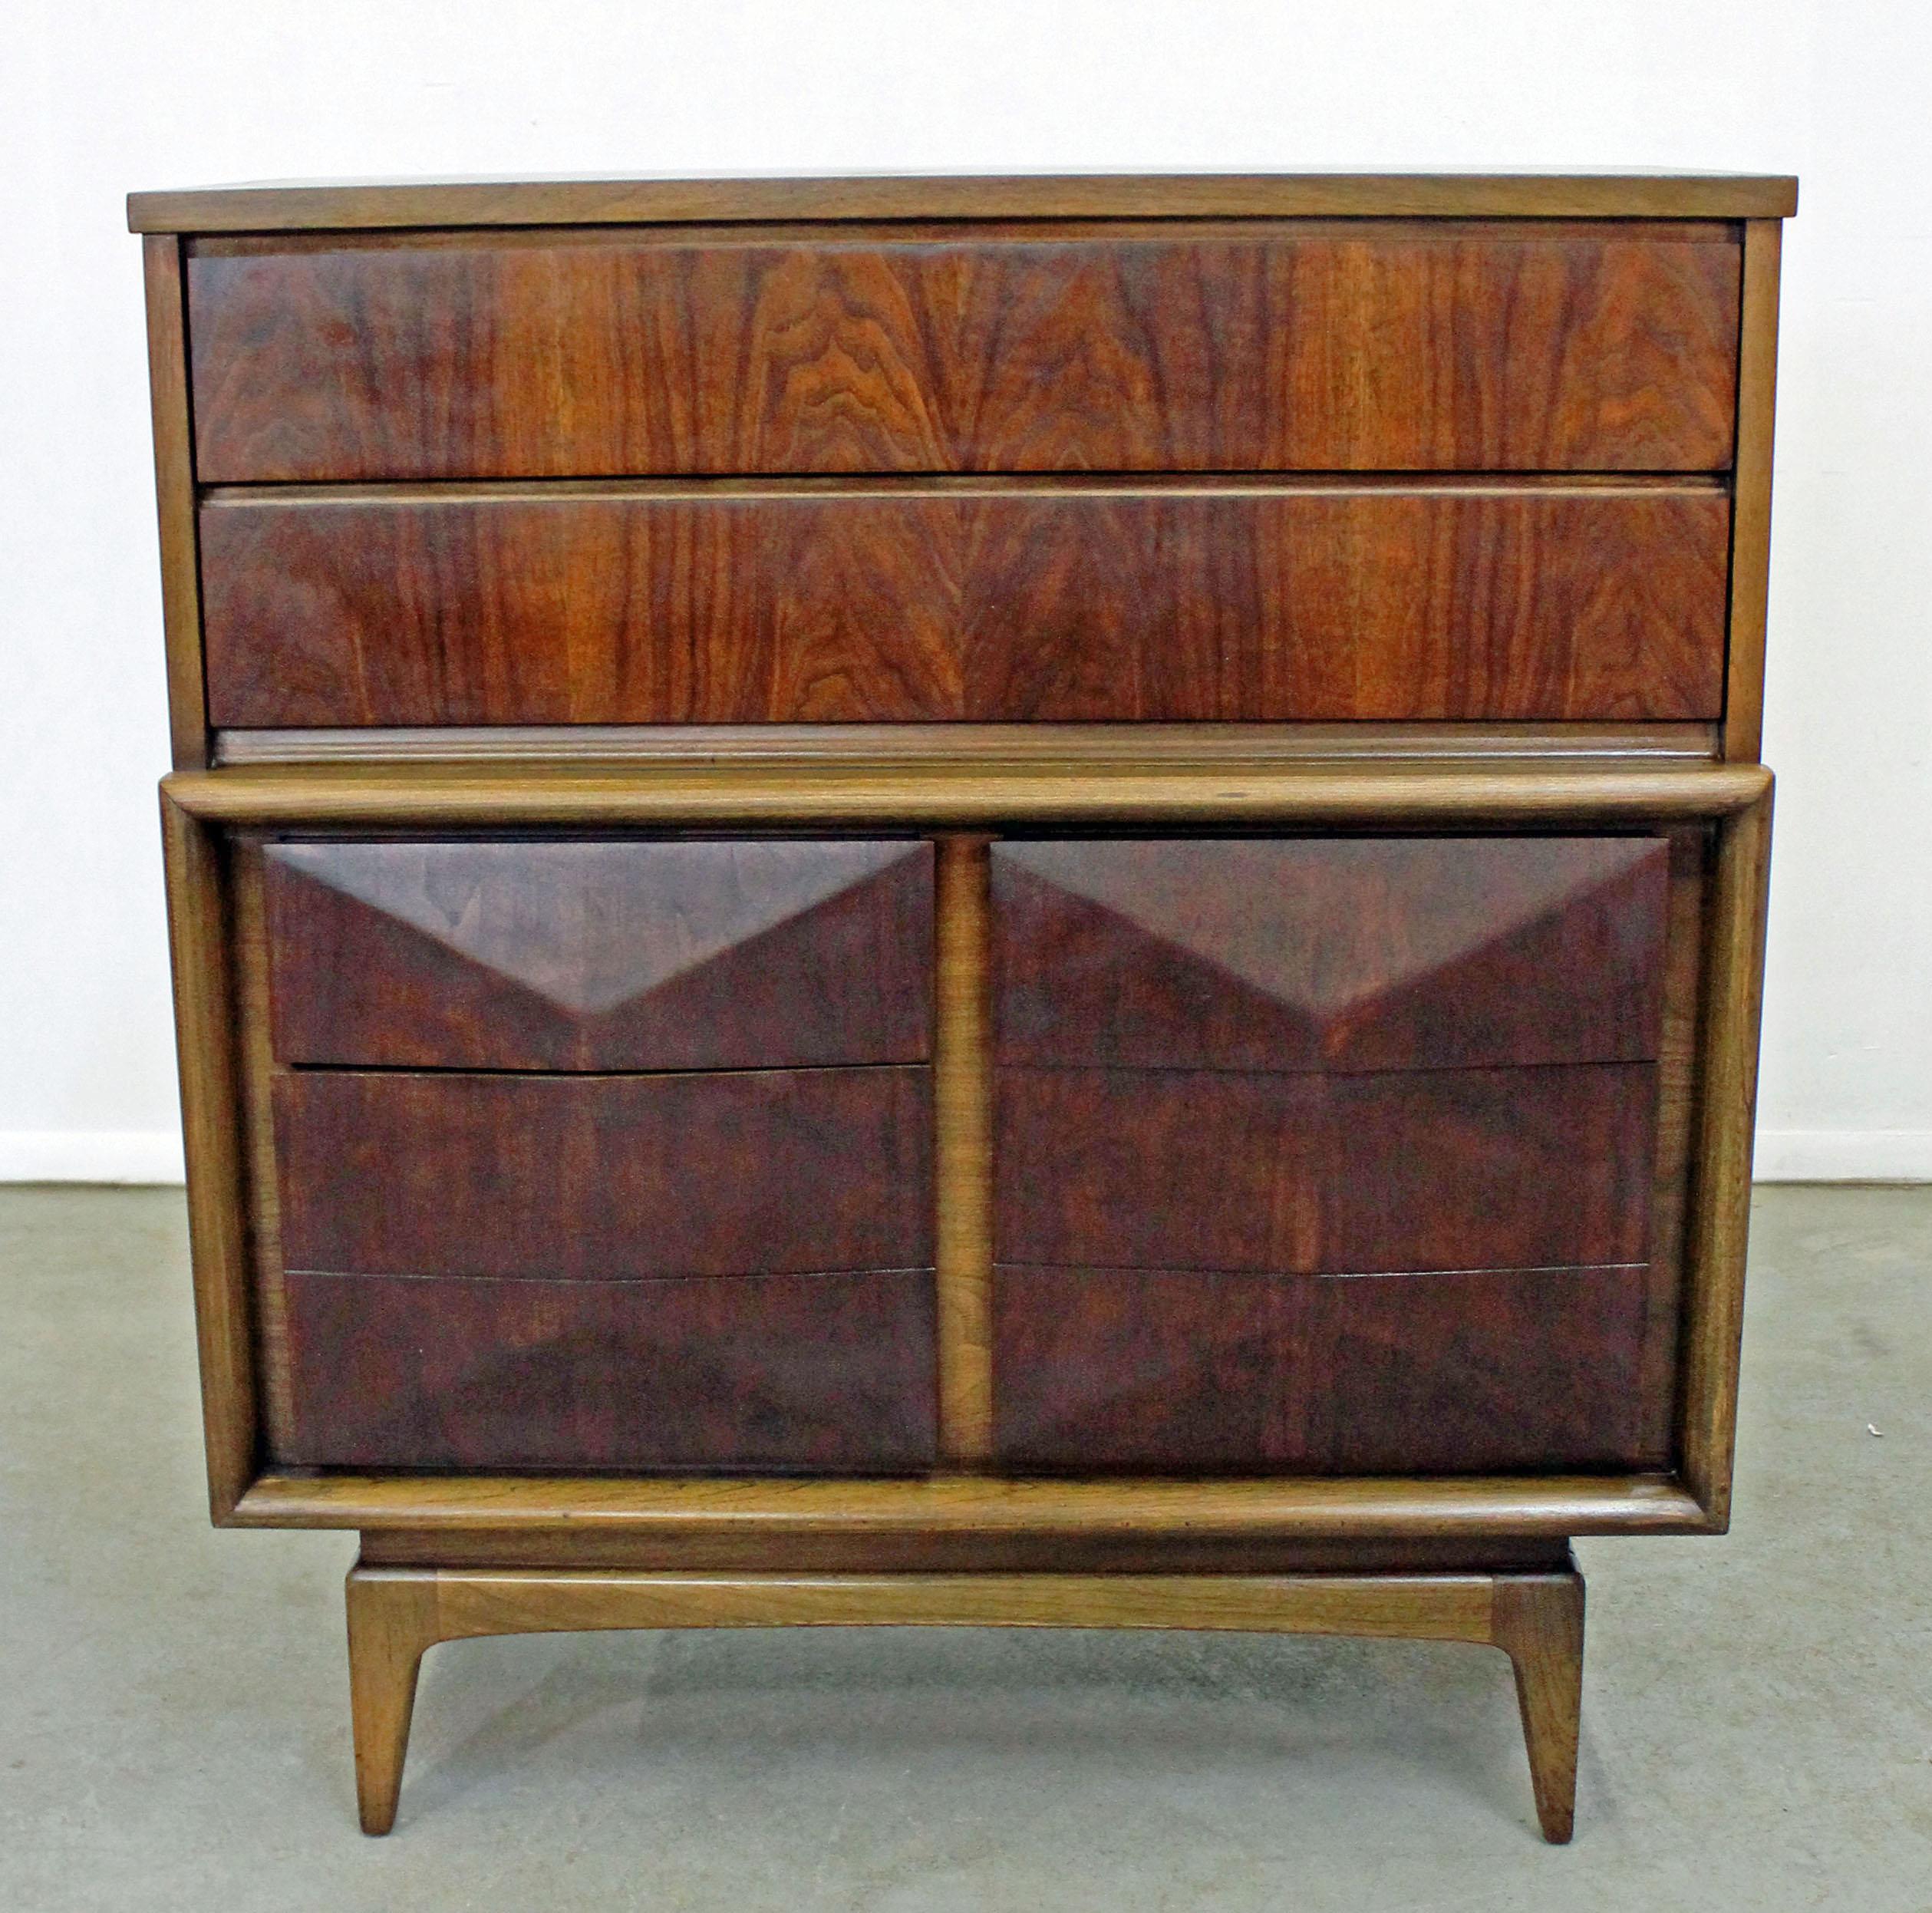 Offered is a vintage walnut tall chest/dresser by United Furniture. Features two top drawers and bottom underneath with sculpted fronts and hidden side pulls. Drawers are all dovetailed. It is in very good condition, shows minor age wear